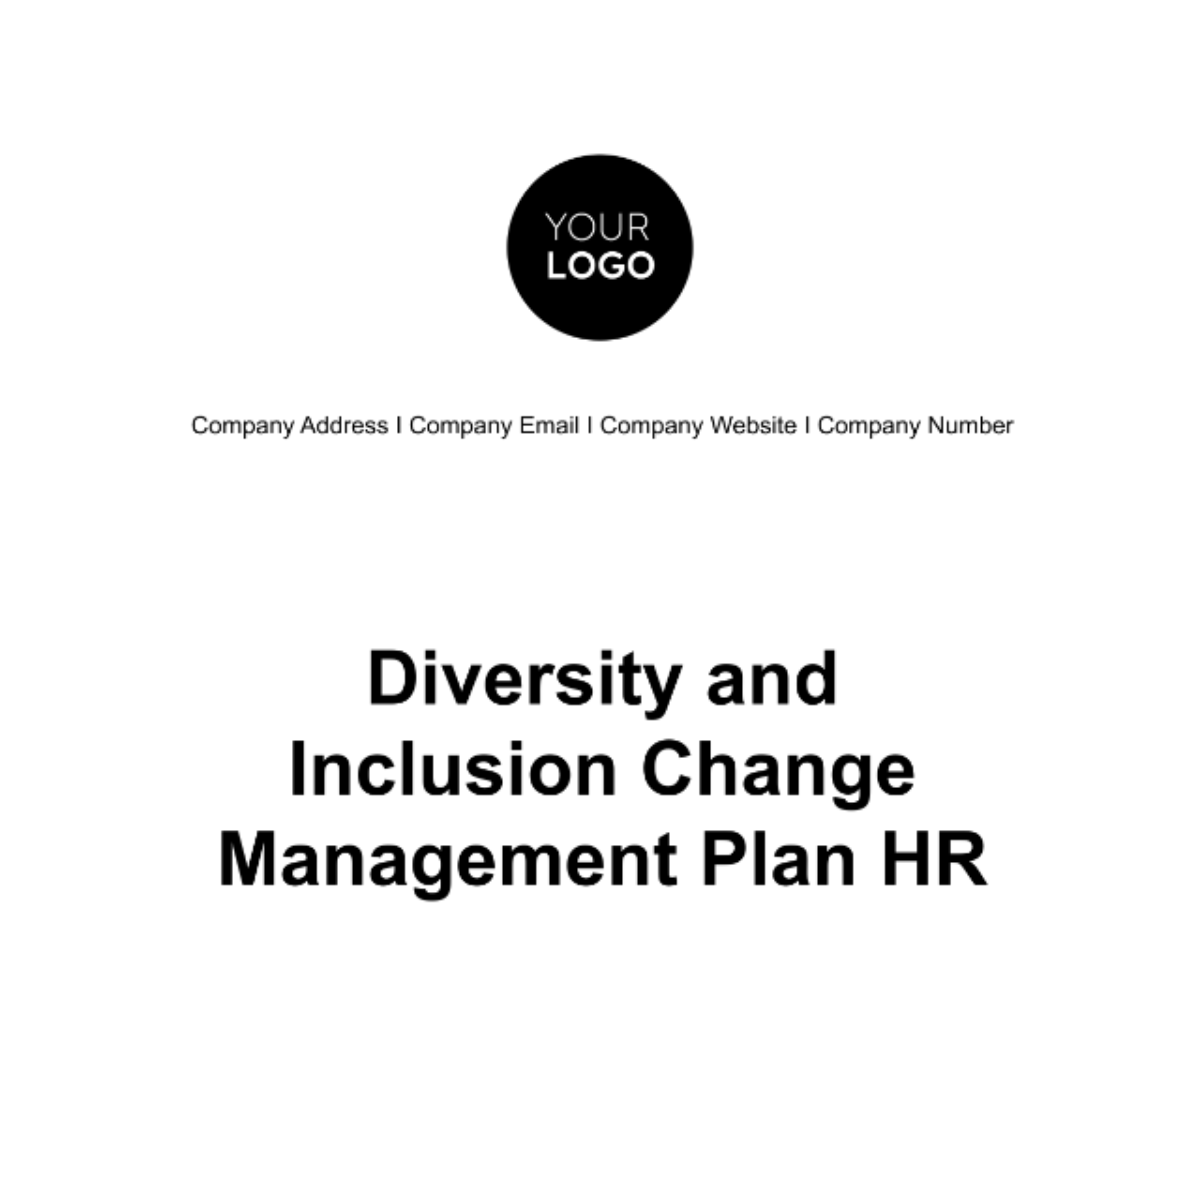 Free Diversity and Inclusion Change Management Plan HR Template